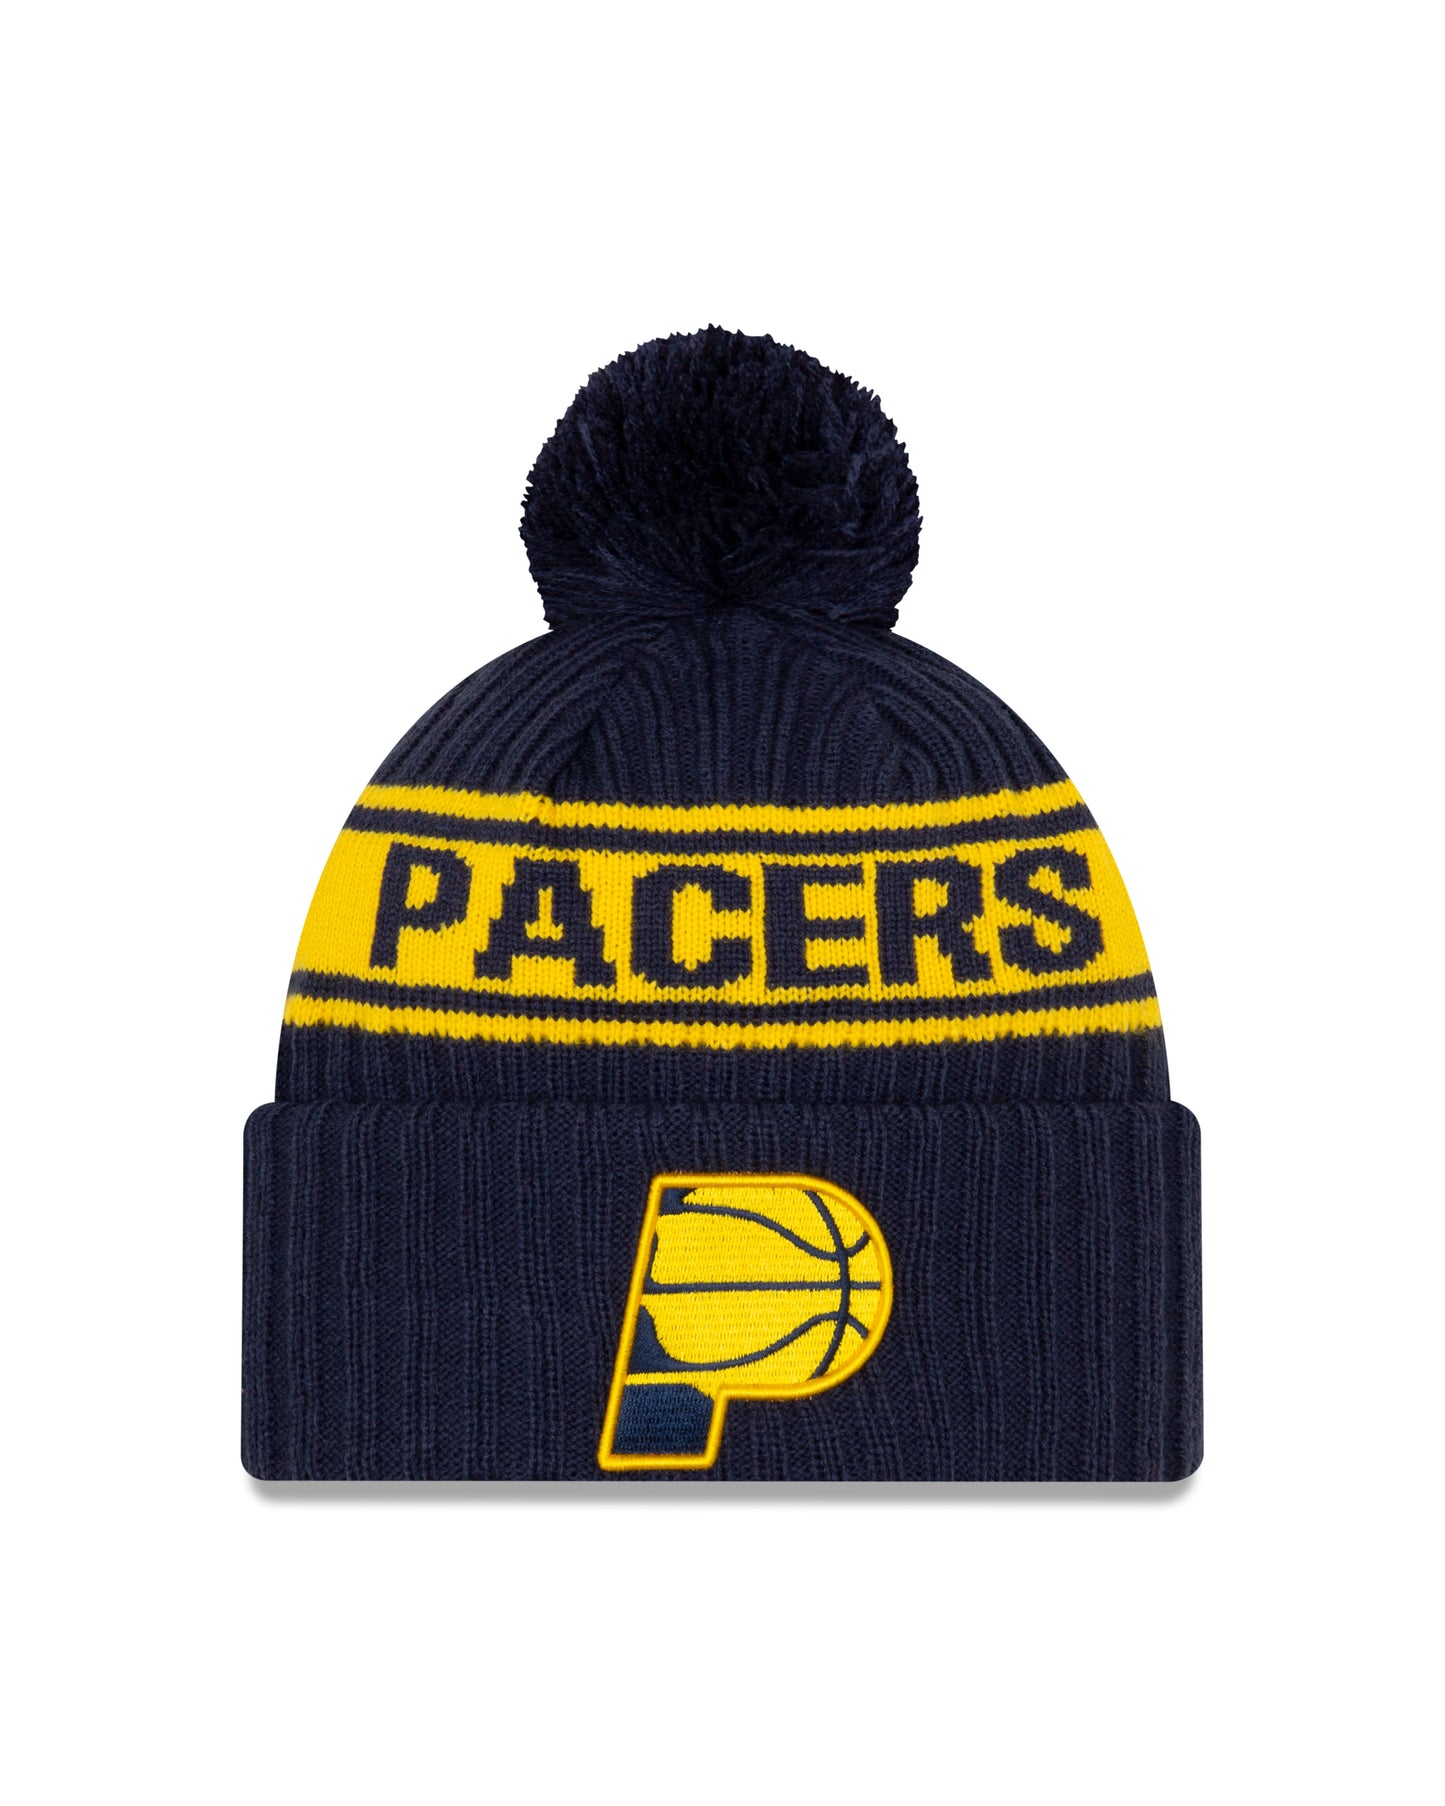 Indiana Pacers New Era Draft Knit Hat